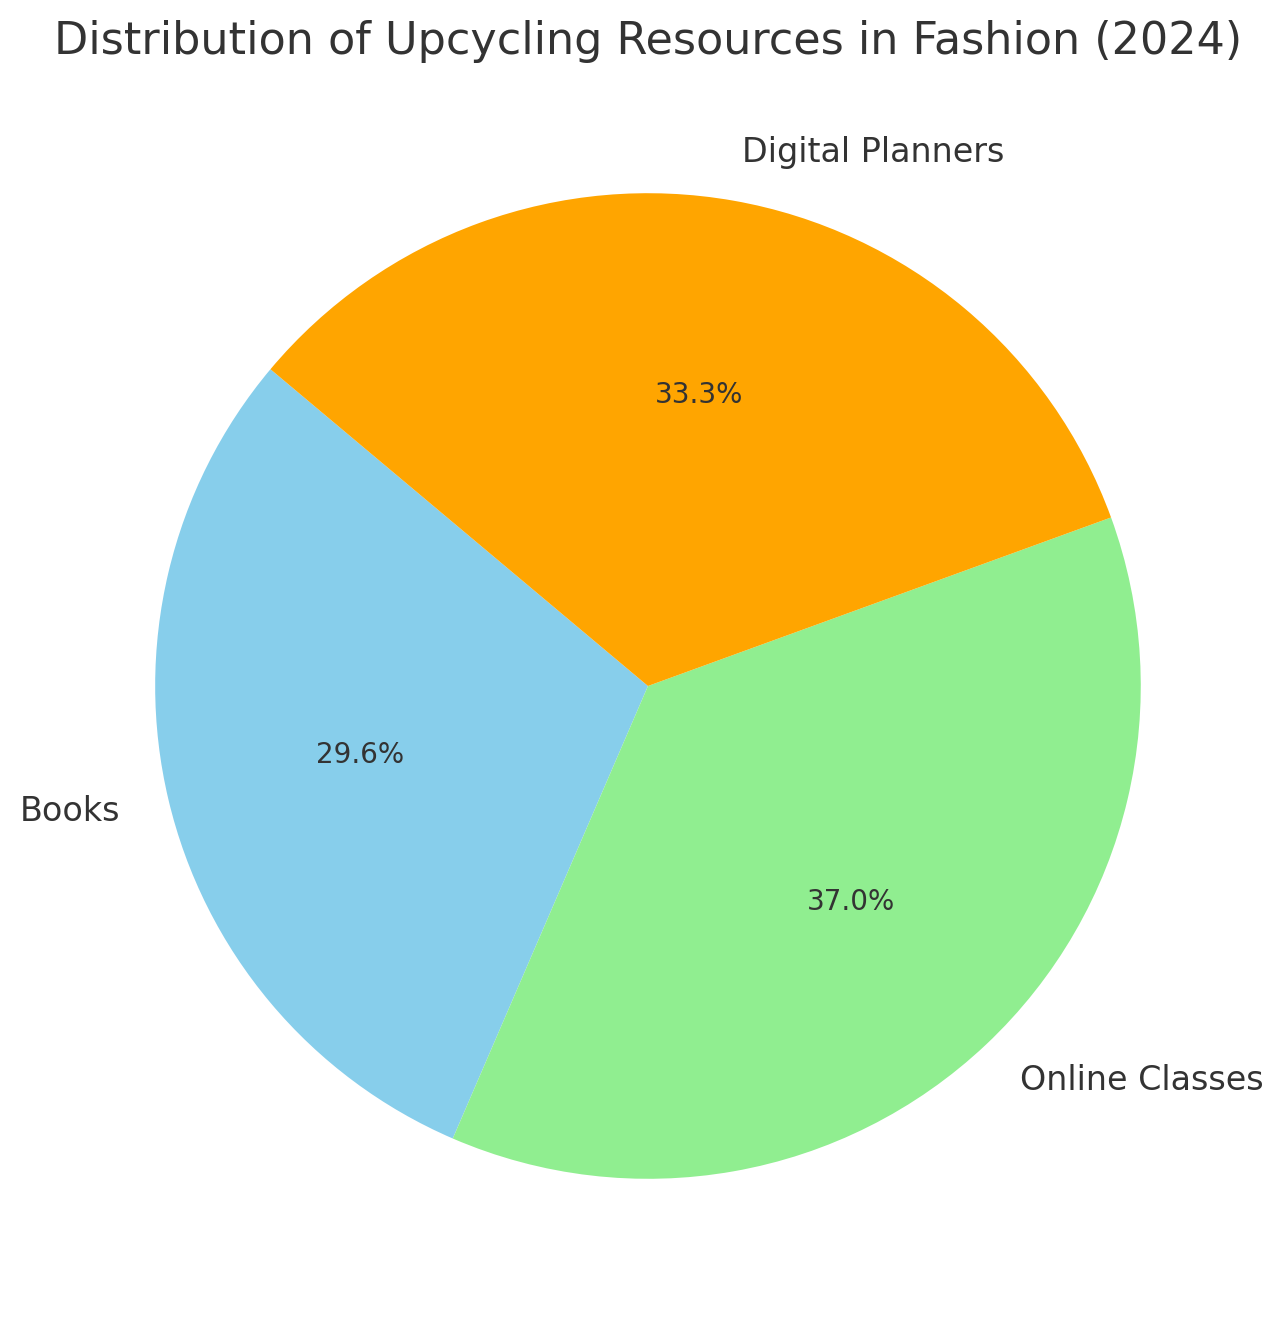 Growth in Upcycling Resources